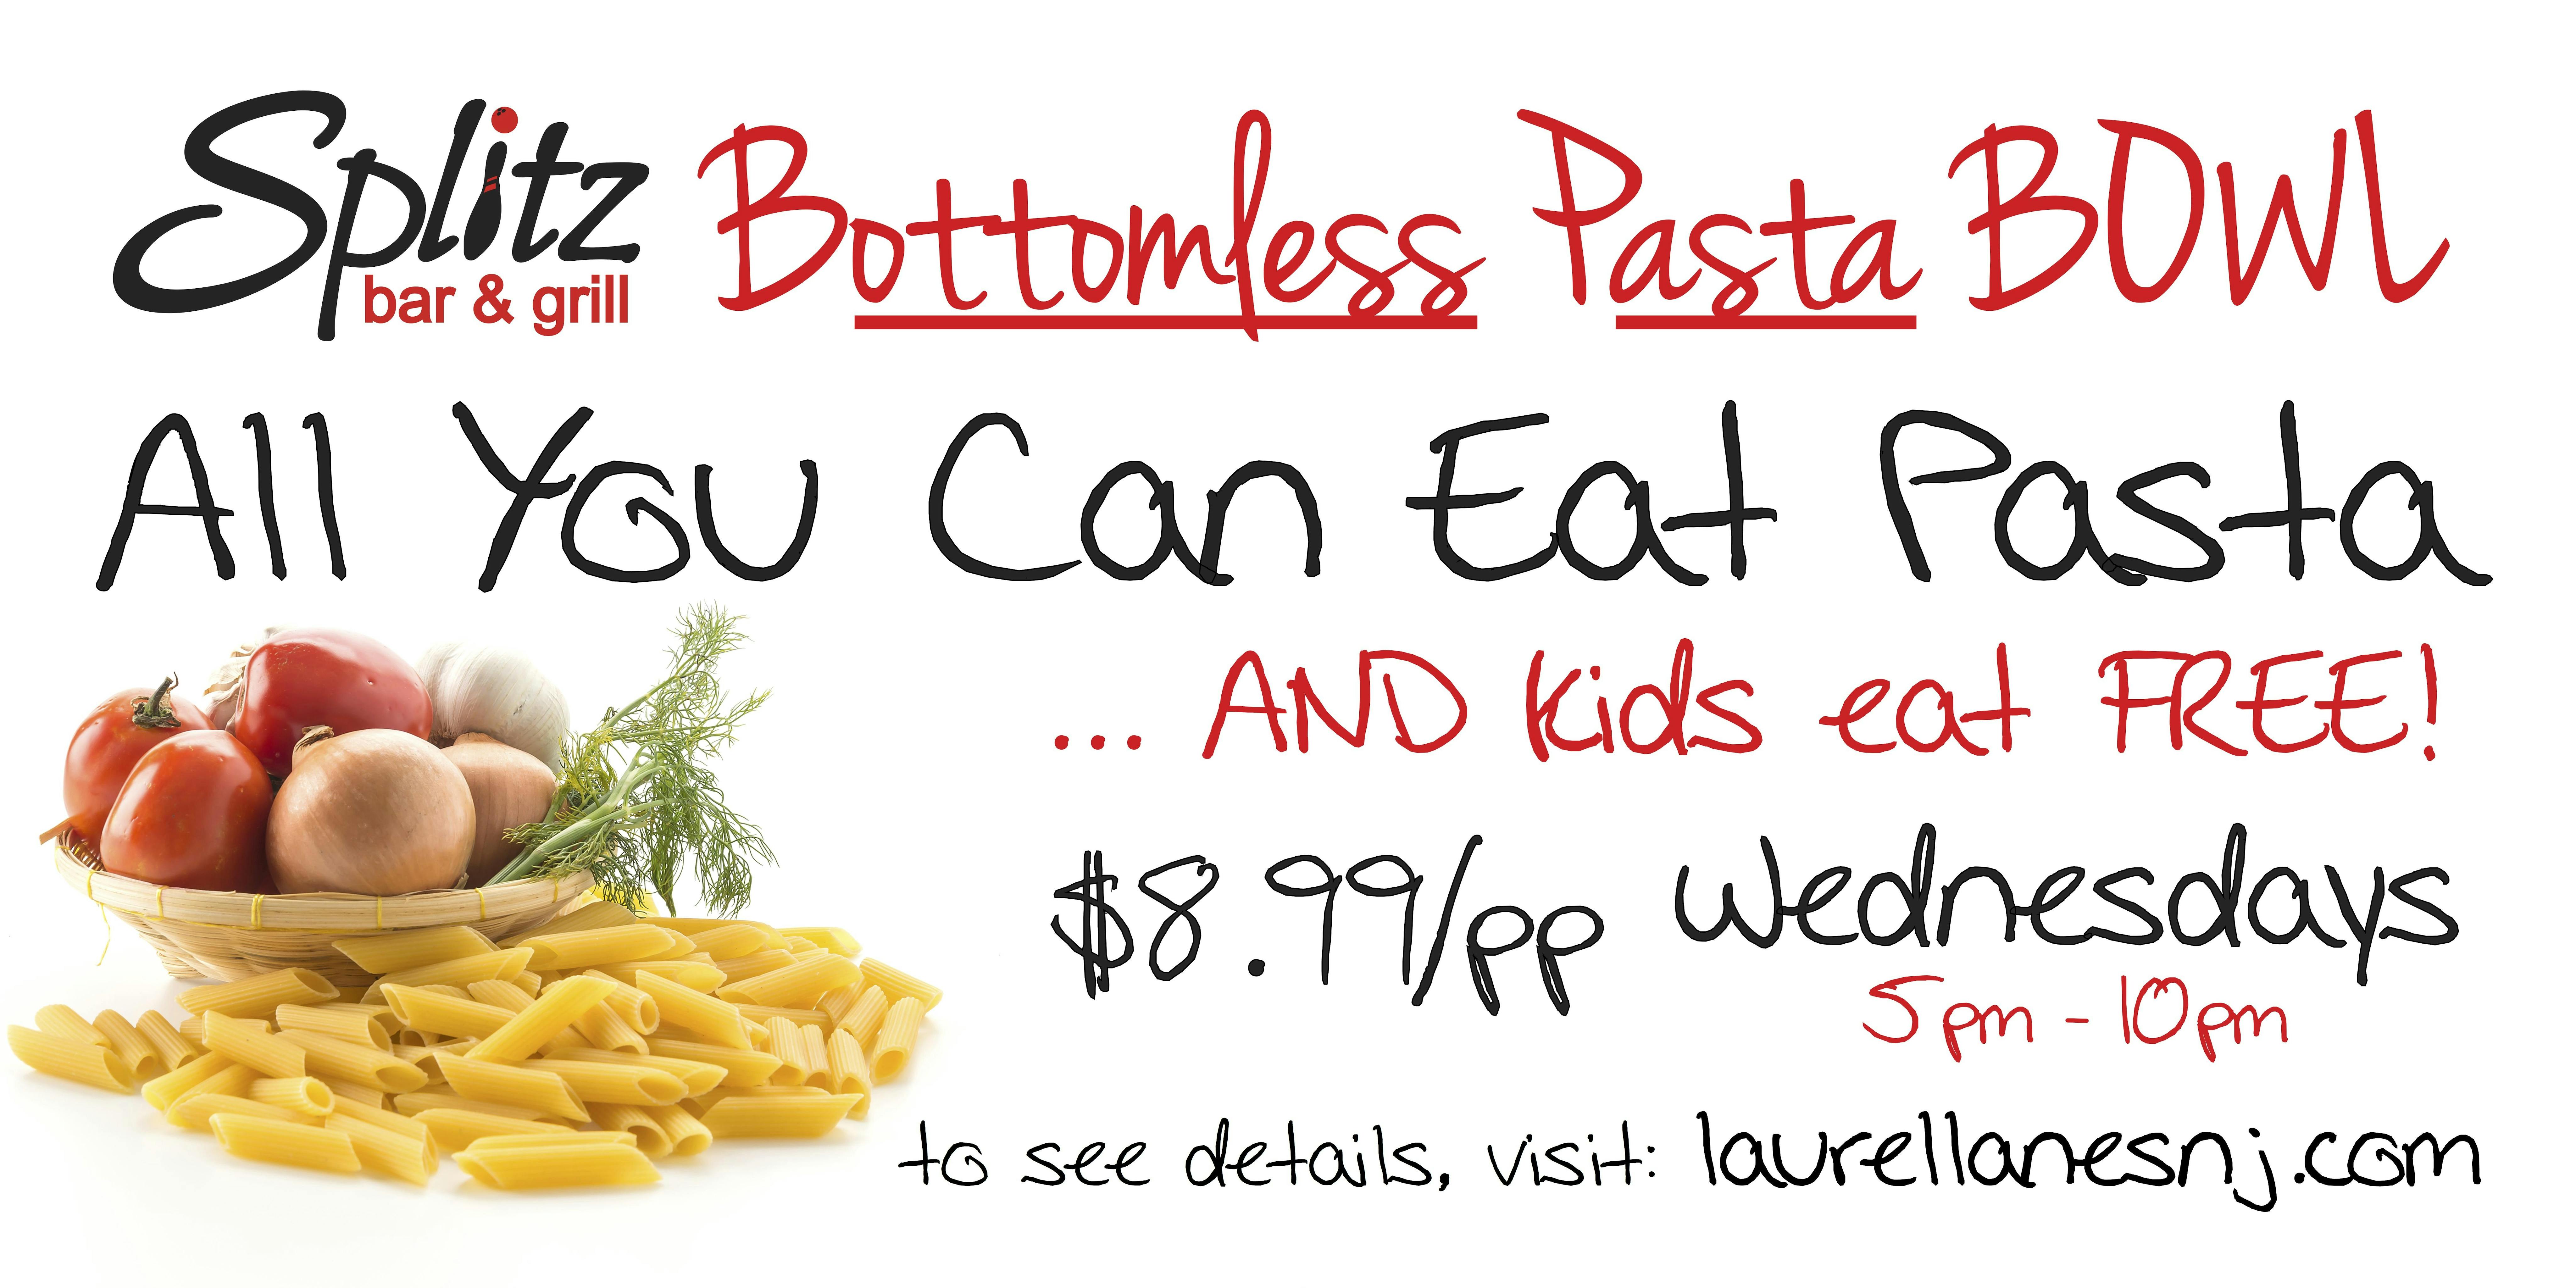 All You Can Eat Pasta...and kids eat FREE!